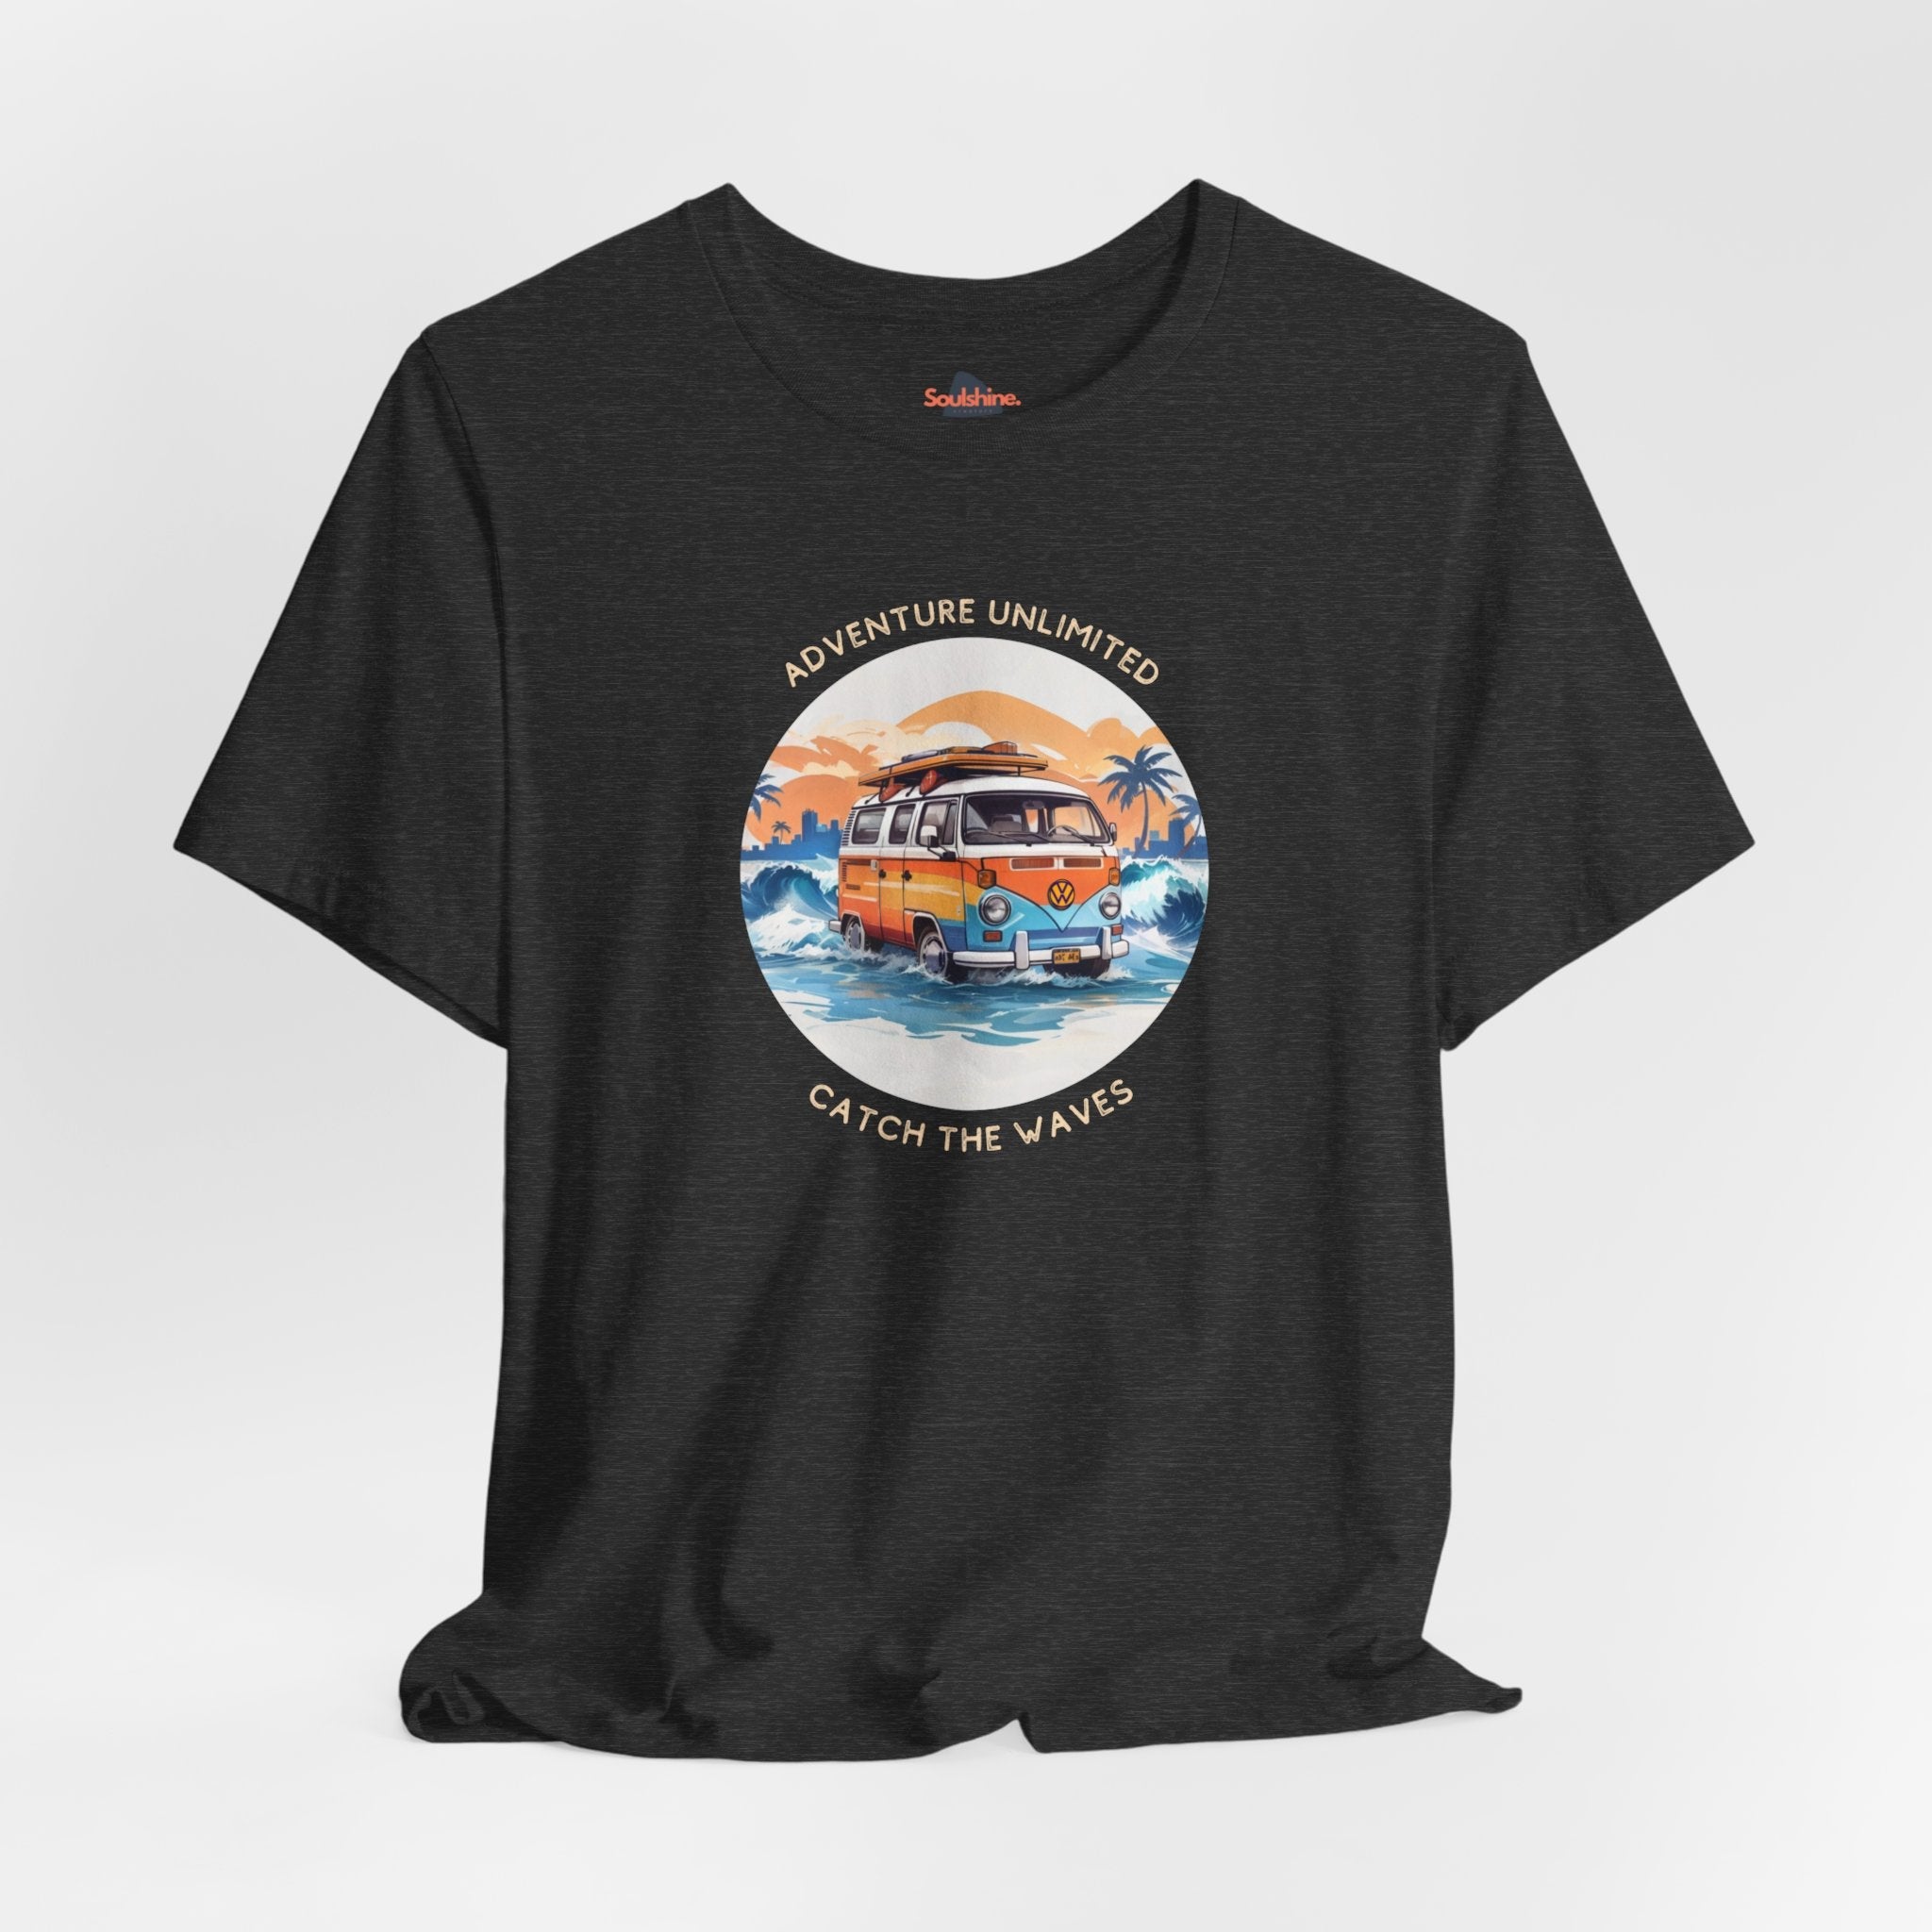 Adventure Unlimited black t shirt with van on beach - direct-to-garment printed item